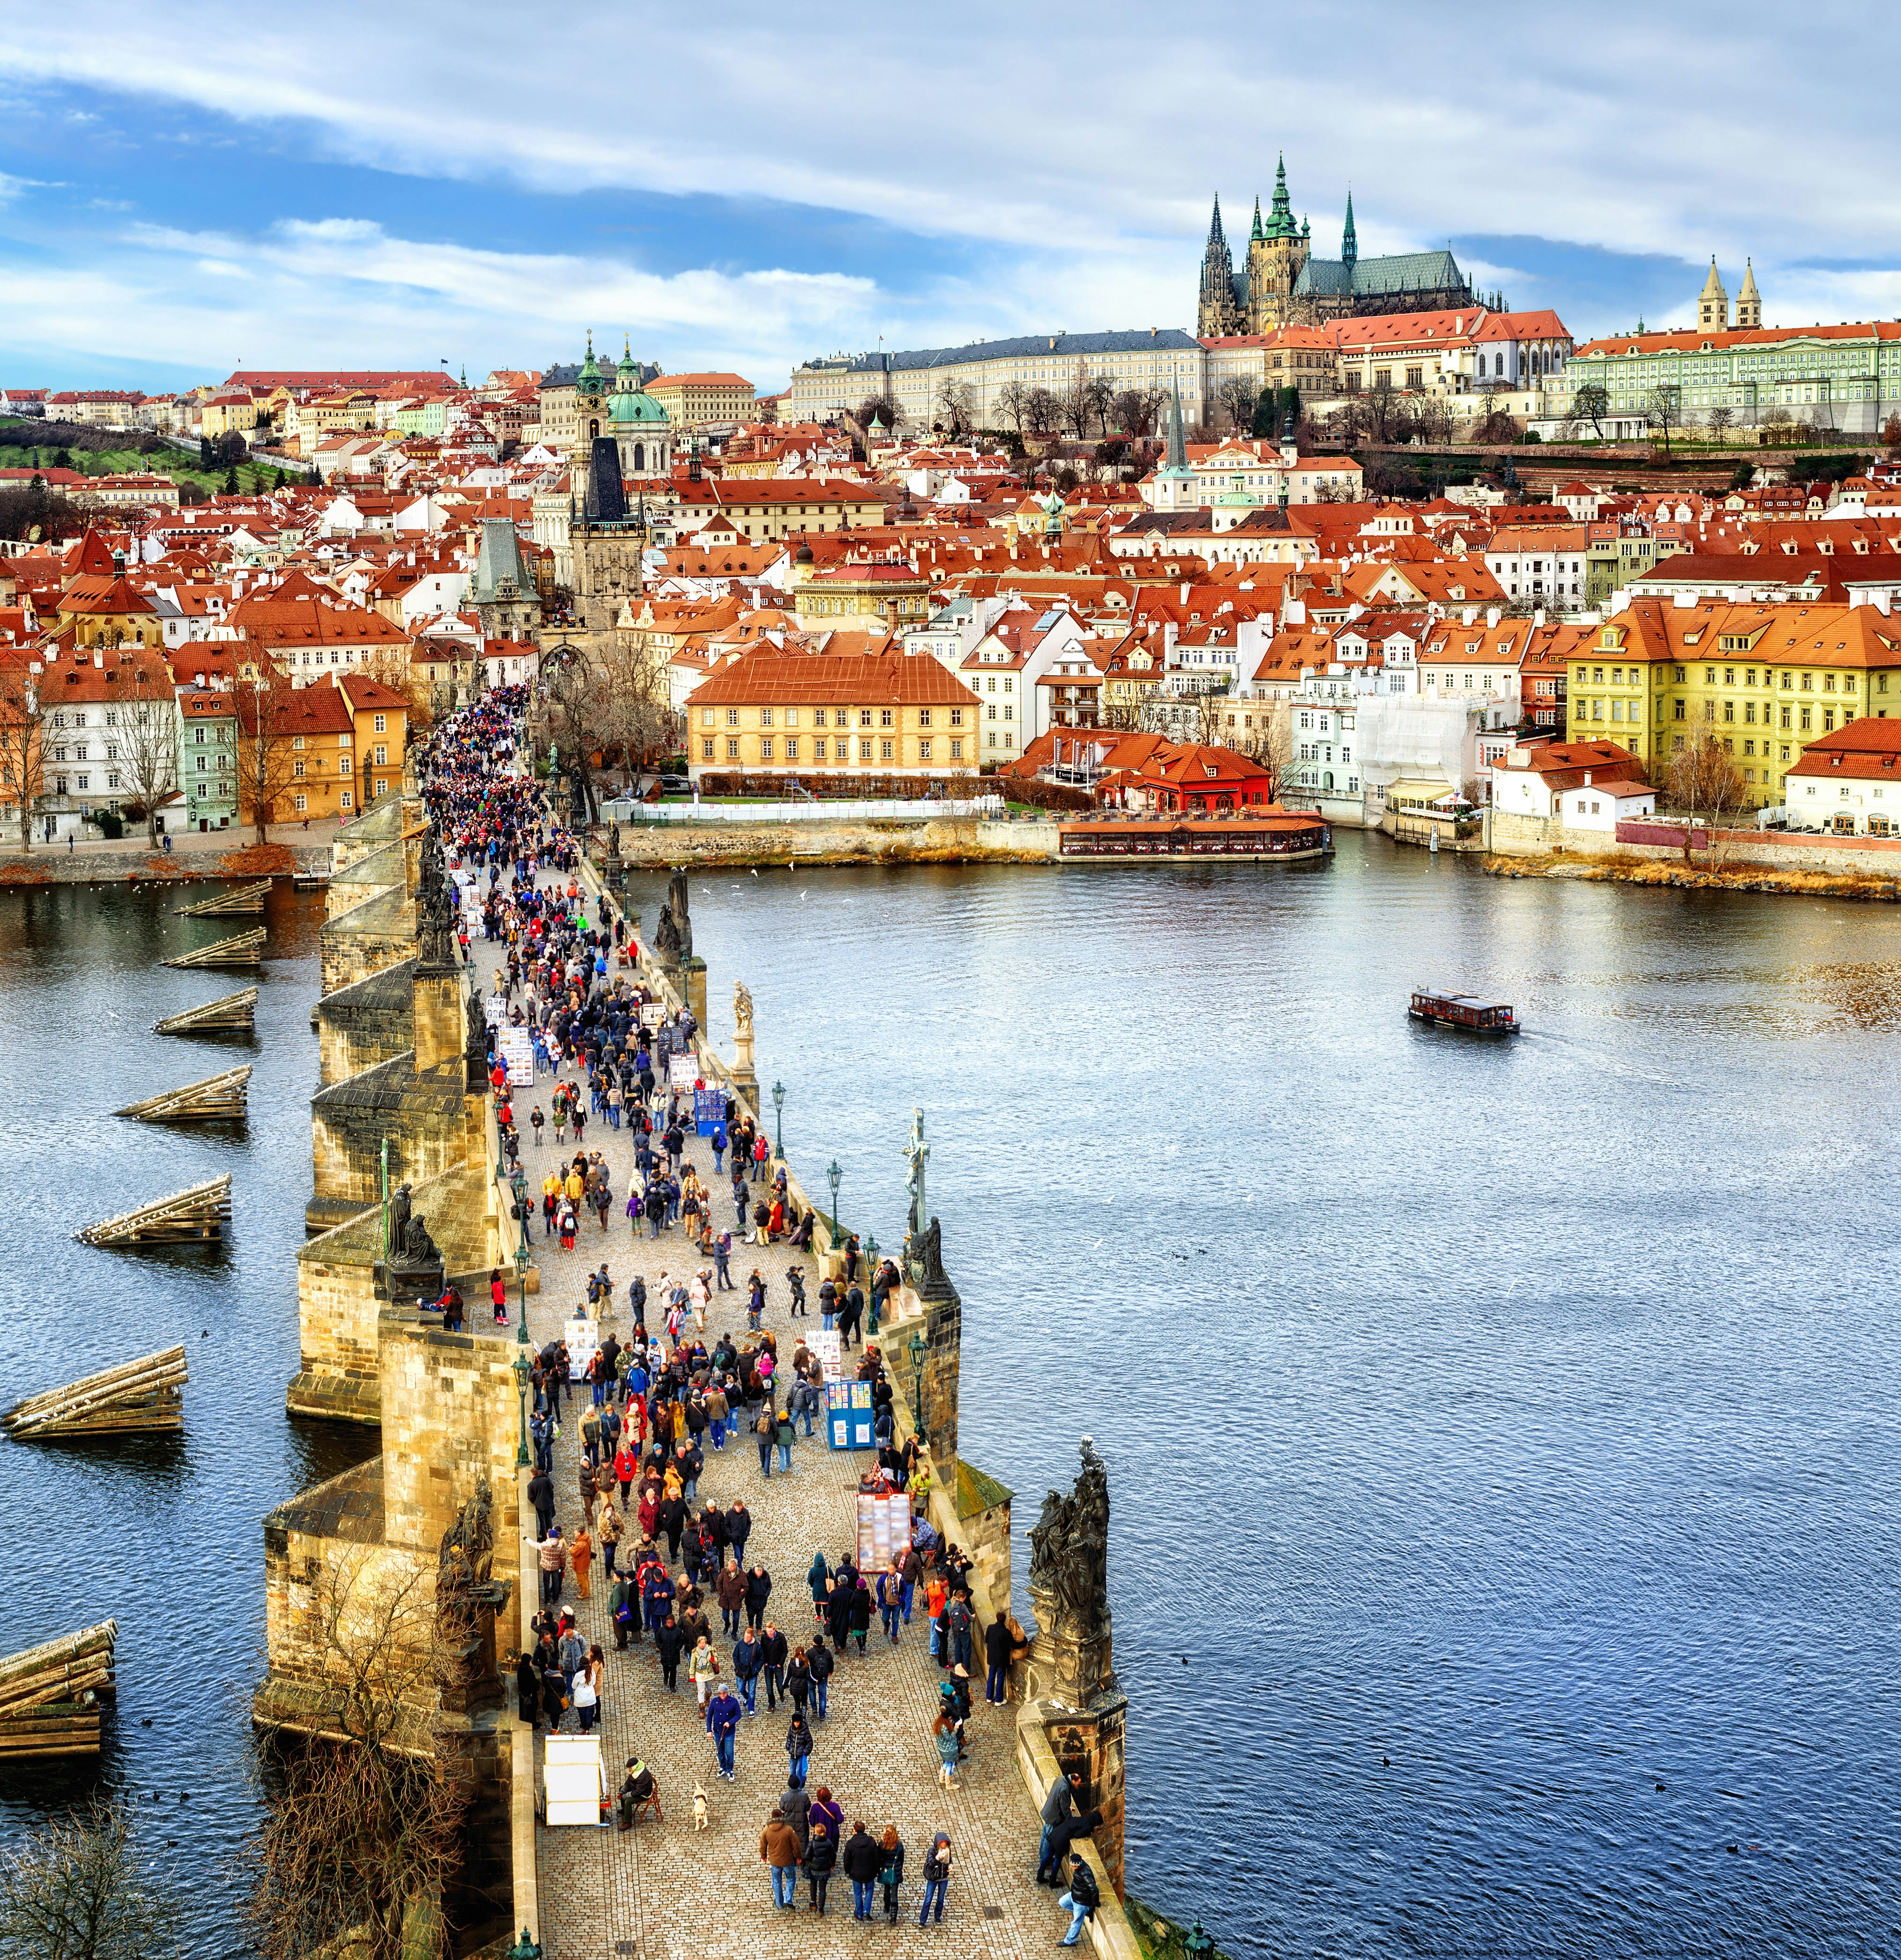 Panorama of Prague with the Castle, Charles Bridge, Vltava river and red roofs of the old town, Czech Republic